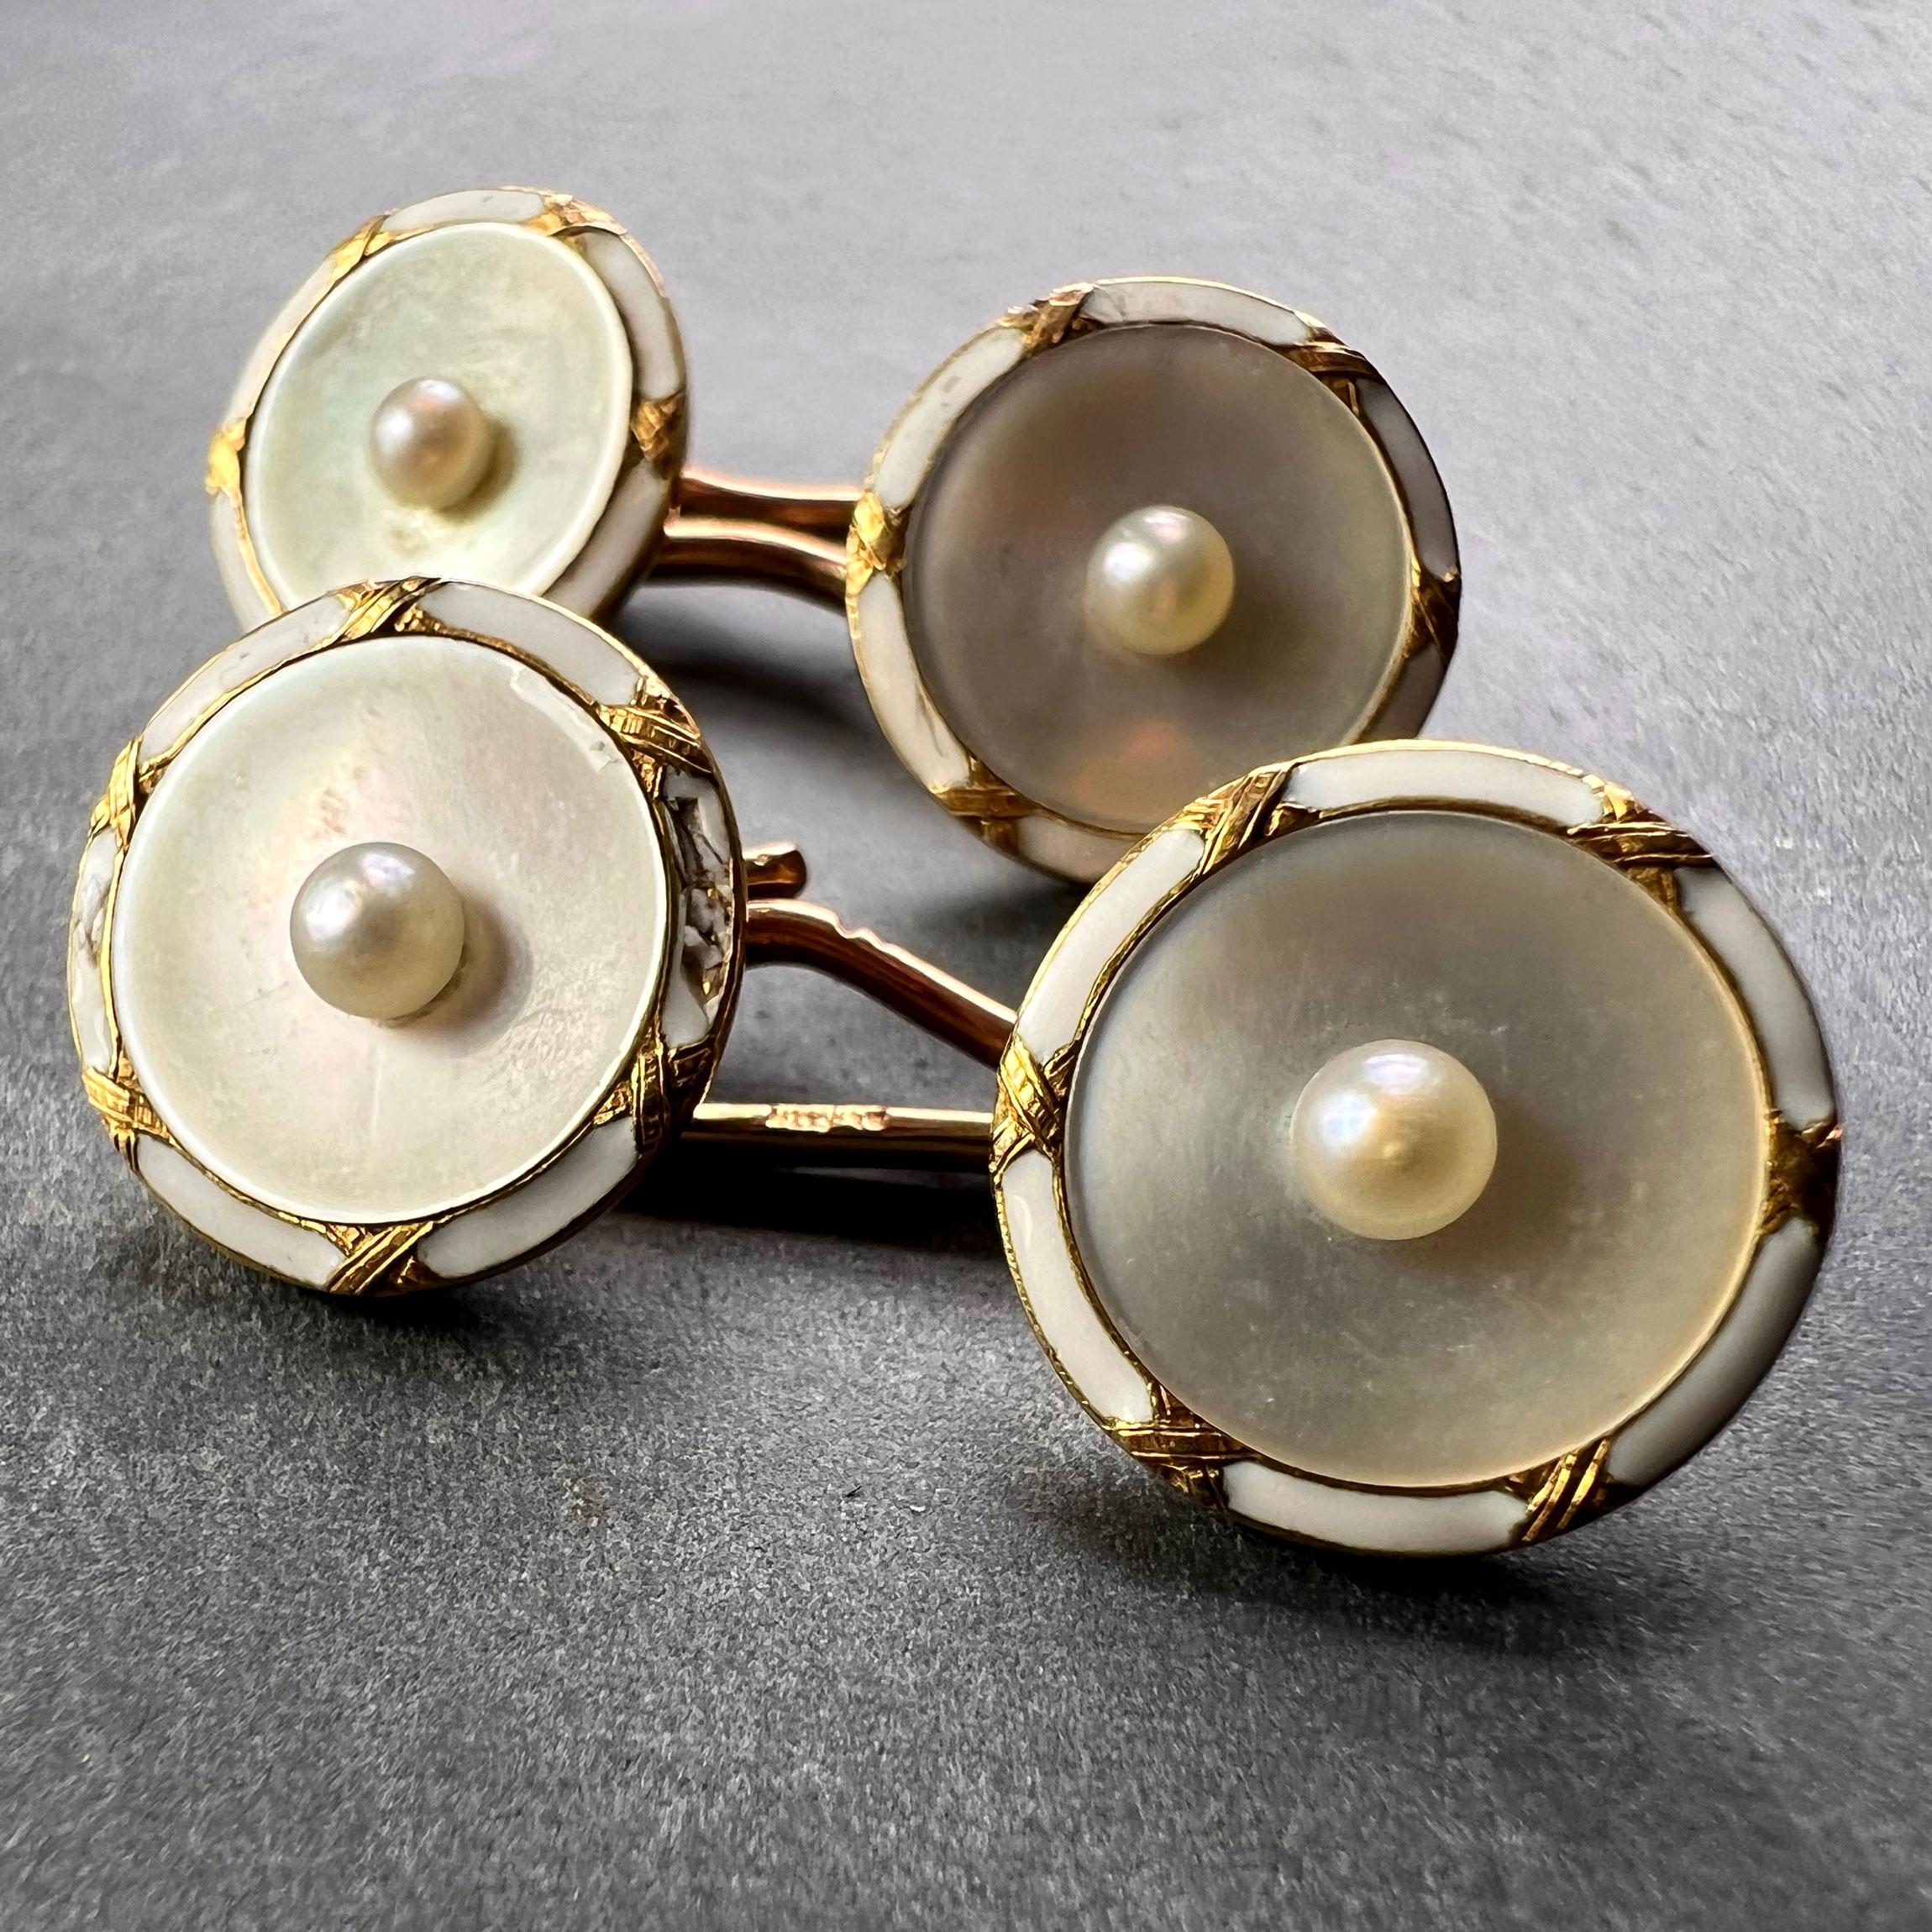 Edwardian French 18k Yellow Gold Pearl, Mother of Pearl and Enamel Cufflinks